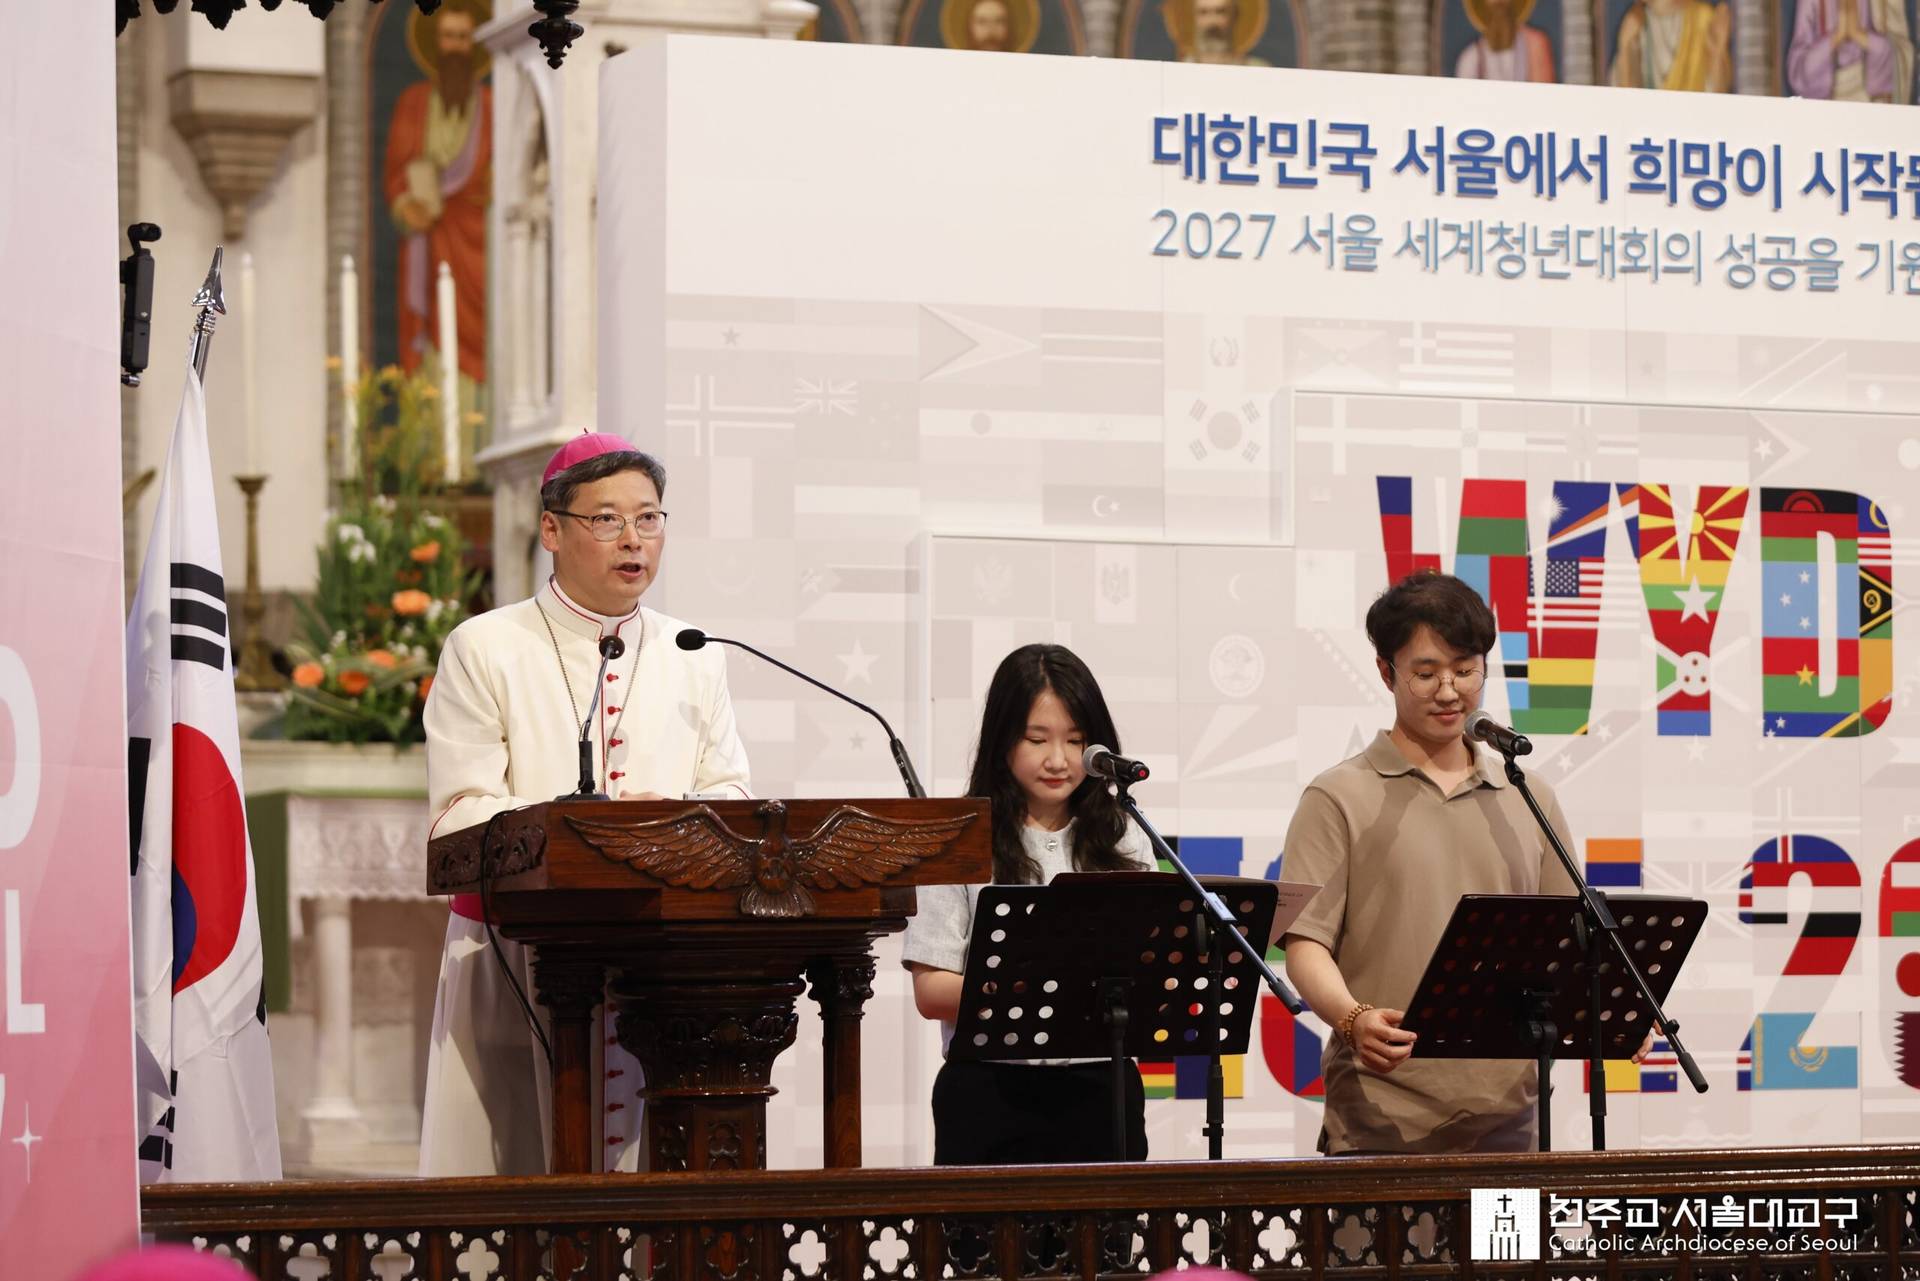 Archbishop Peter Soon-taick Chung of Seoul, Chair of the Local Organizing Committee for World Youth Day (WYD) Seoul 2027, speaks at a July 28 launch event for the local preparation process for WYD 2027. (Credit: Archdiocese of Seoul.)